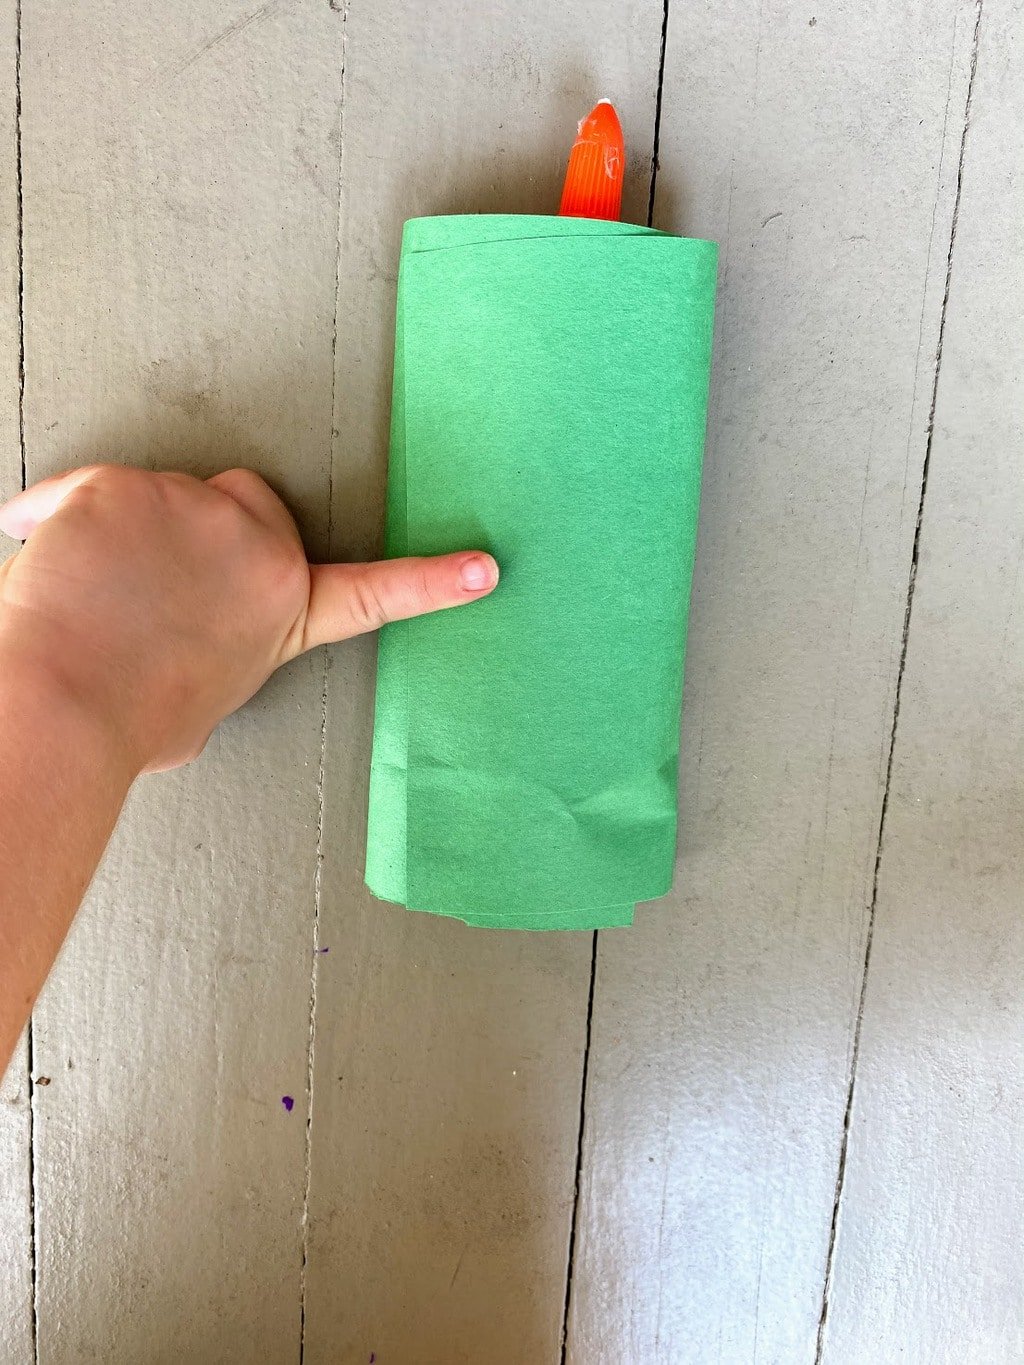 securing green paper to empty glue bottle